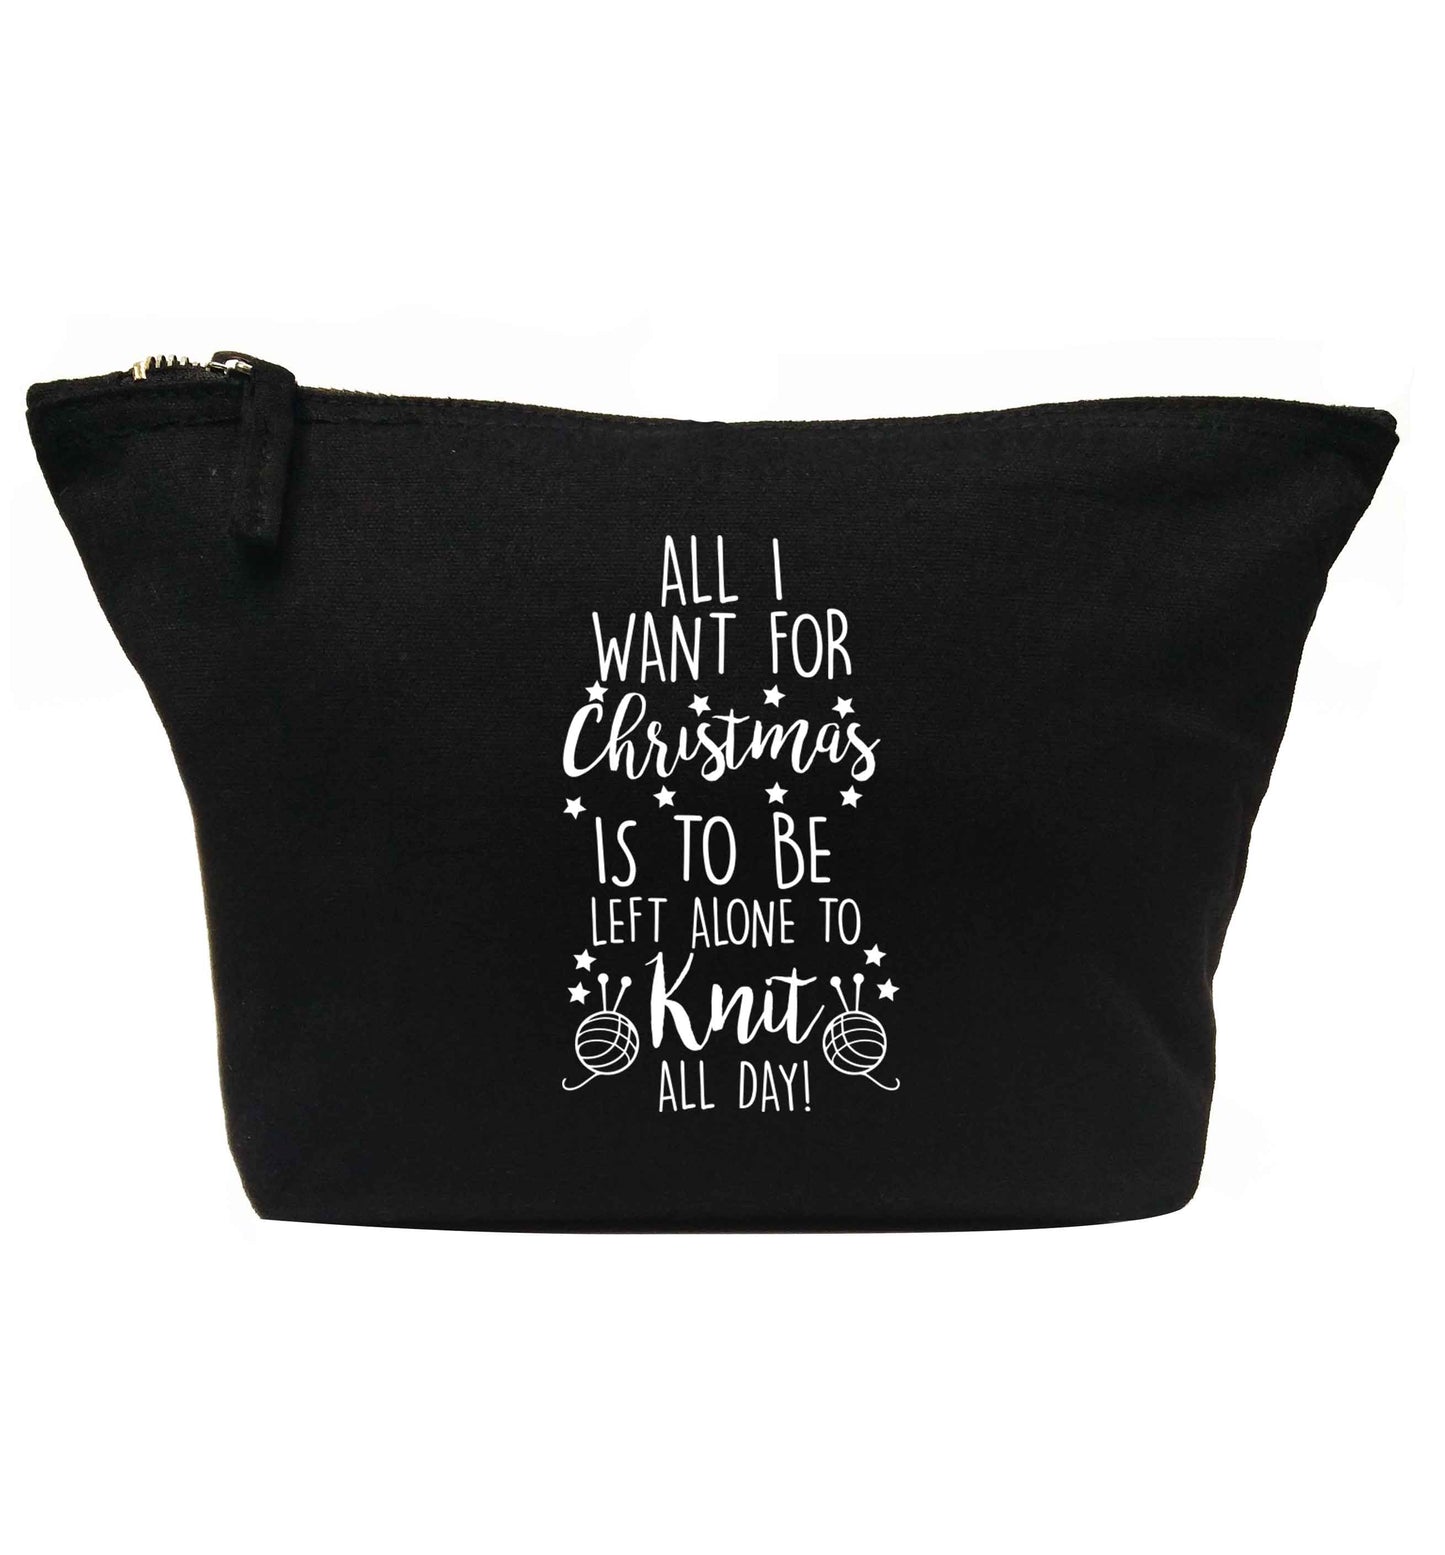 All I want for Christmas is to be left along to knit all day | Makeup / wash bag